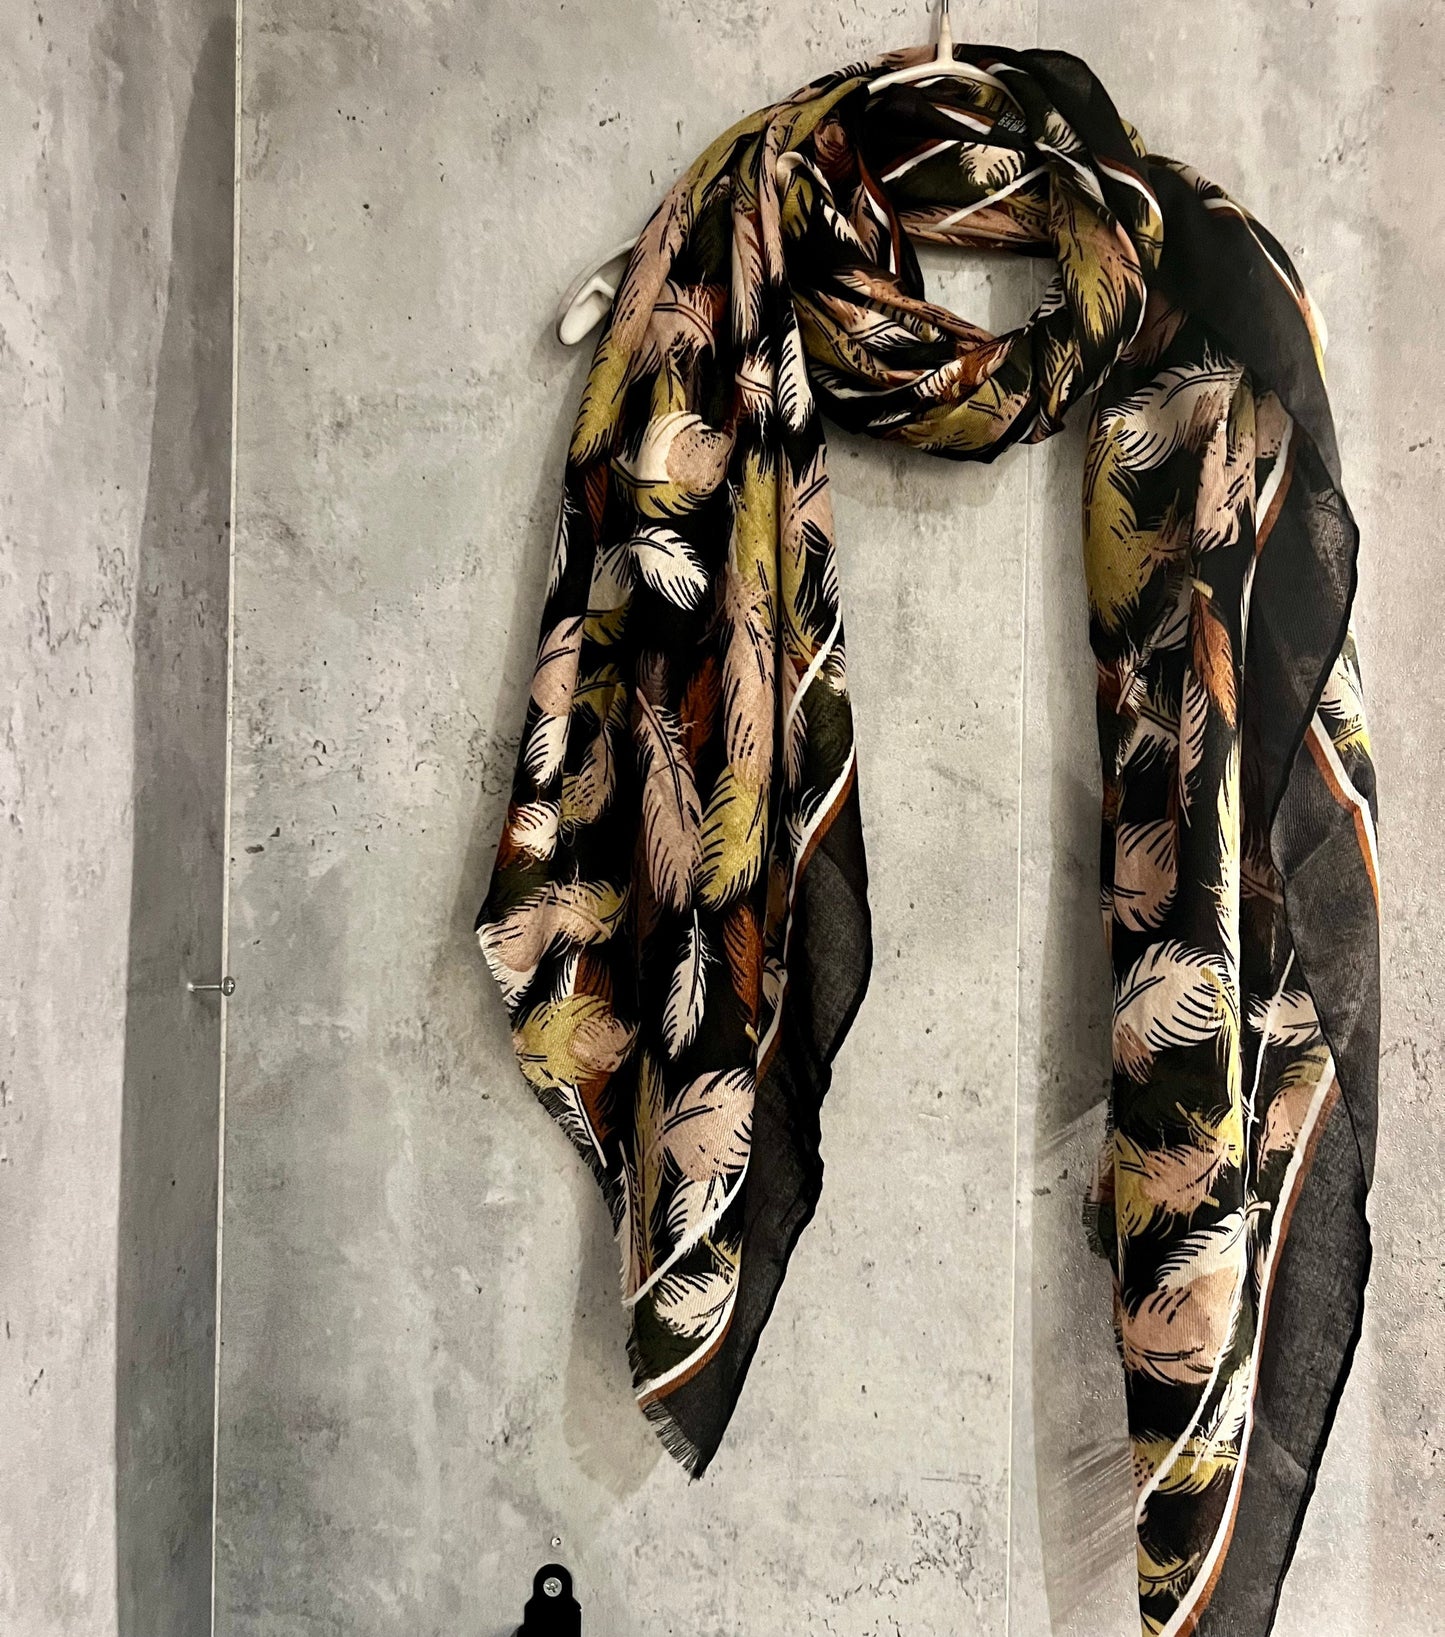 Floating Green Beige Feathers Black Cotton Scarf/Summer Autumn Winter Women Scarf/Gifts For Her Birthday Christmas/UK Seller/Printed Scarf